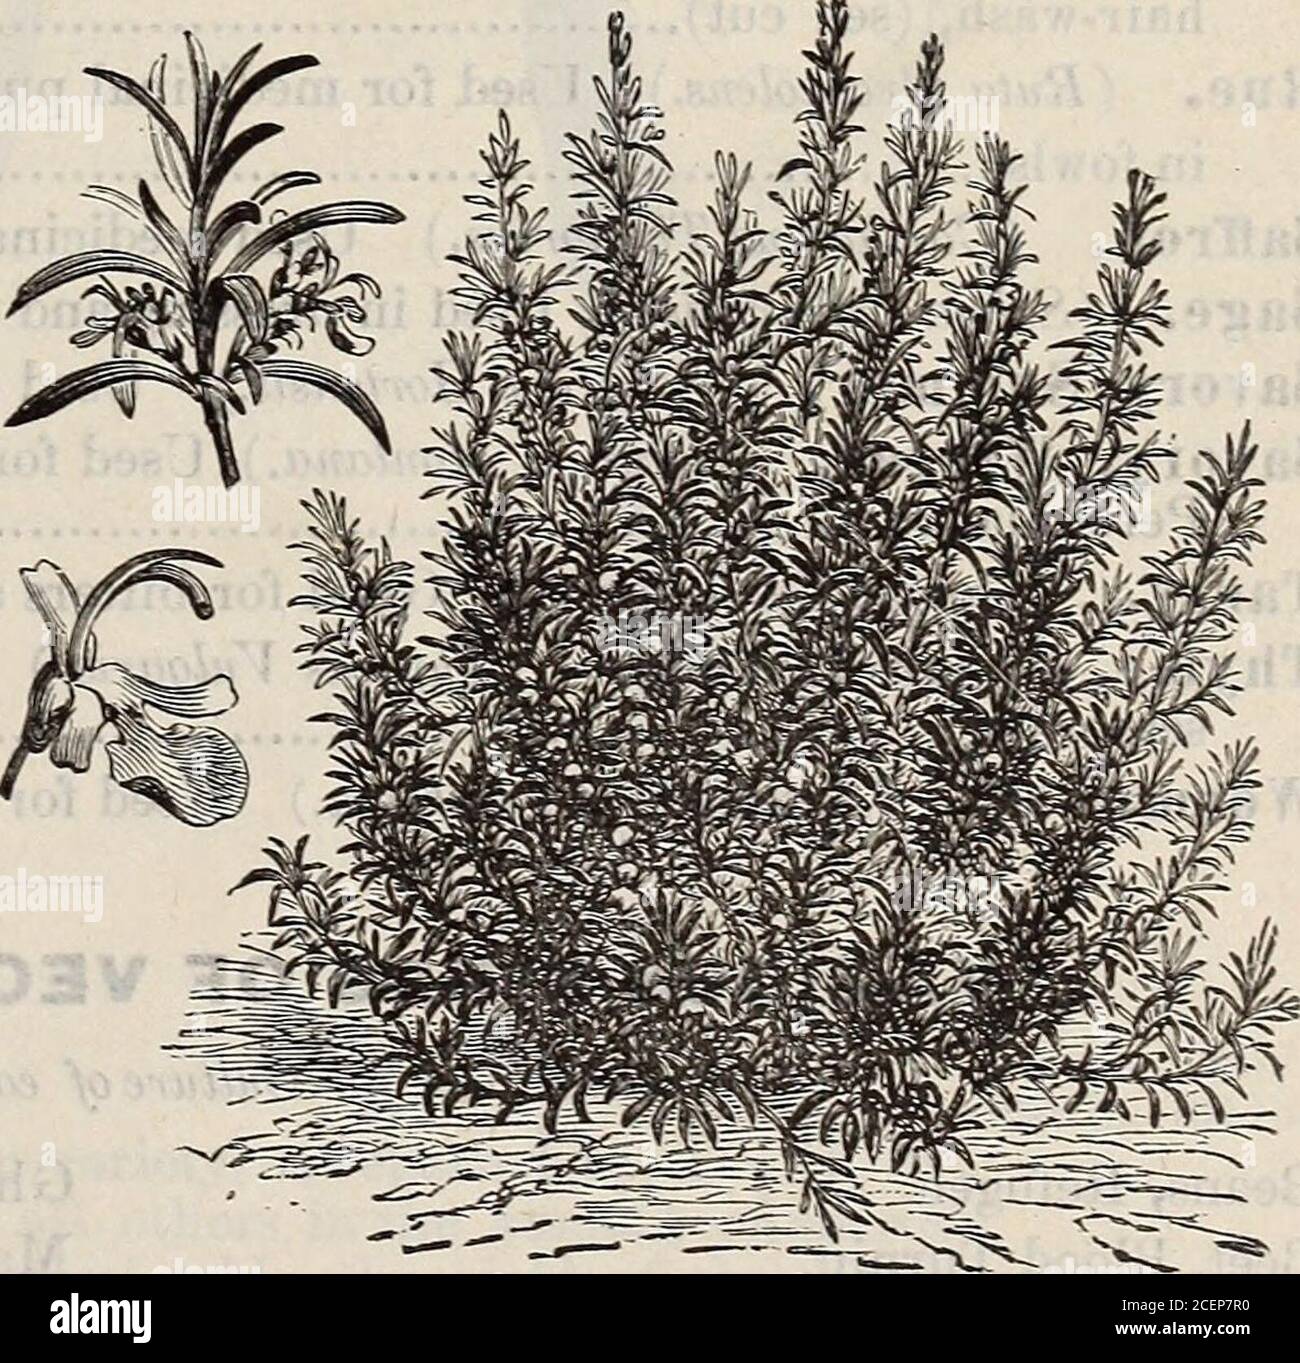 . Catalogue of seeds, agricultural & horticultural supplies and guide for the garden, field & farm. Lavender. Angelica, Garden. (Archangelica Officinalis.) Useful on account of its medicinalqualities Anise, (Pimpinella Anisum.) Seeds and leaves are both aromatic and carminative. Of-ficinal and medicinal Balm. (Melissa Officinalis.) For making Balm Tea ; valuable in cases of fever Basil, Sweet. (Ocymum Basilicum.) Culinary herb; used for flavoring soups, etc Bene. (Sesamum Orientale.) The leaves are used for dysentery and diarrhoea Borage. (Borago Officinalis.) Used for salads; excellent for be Stock Photo